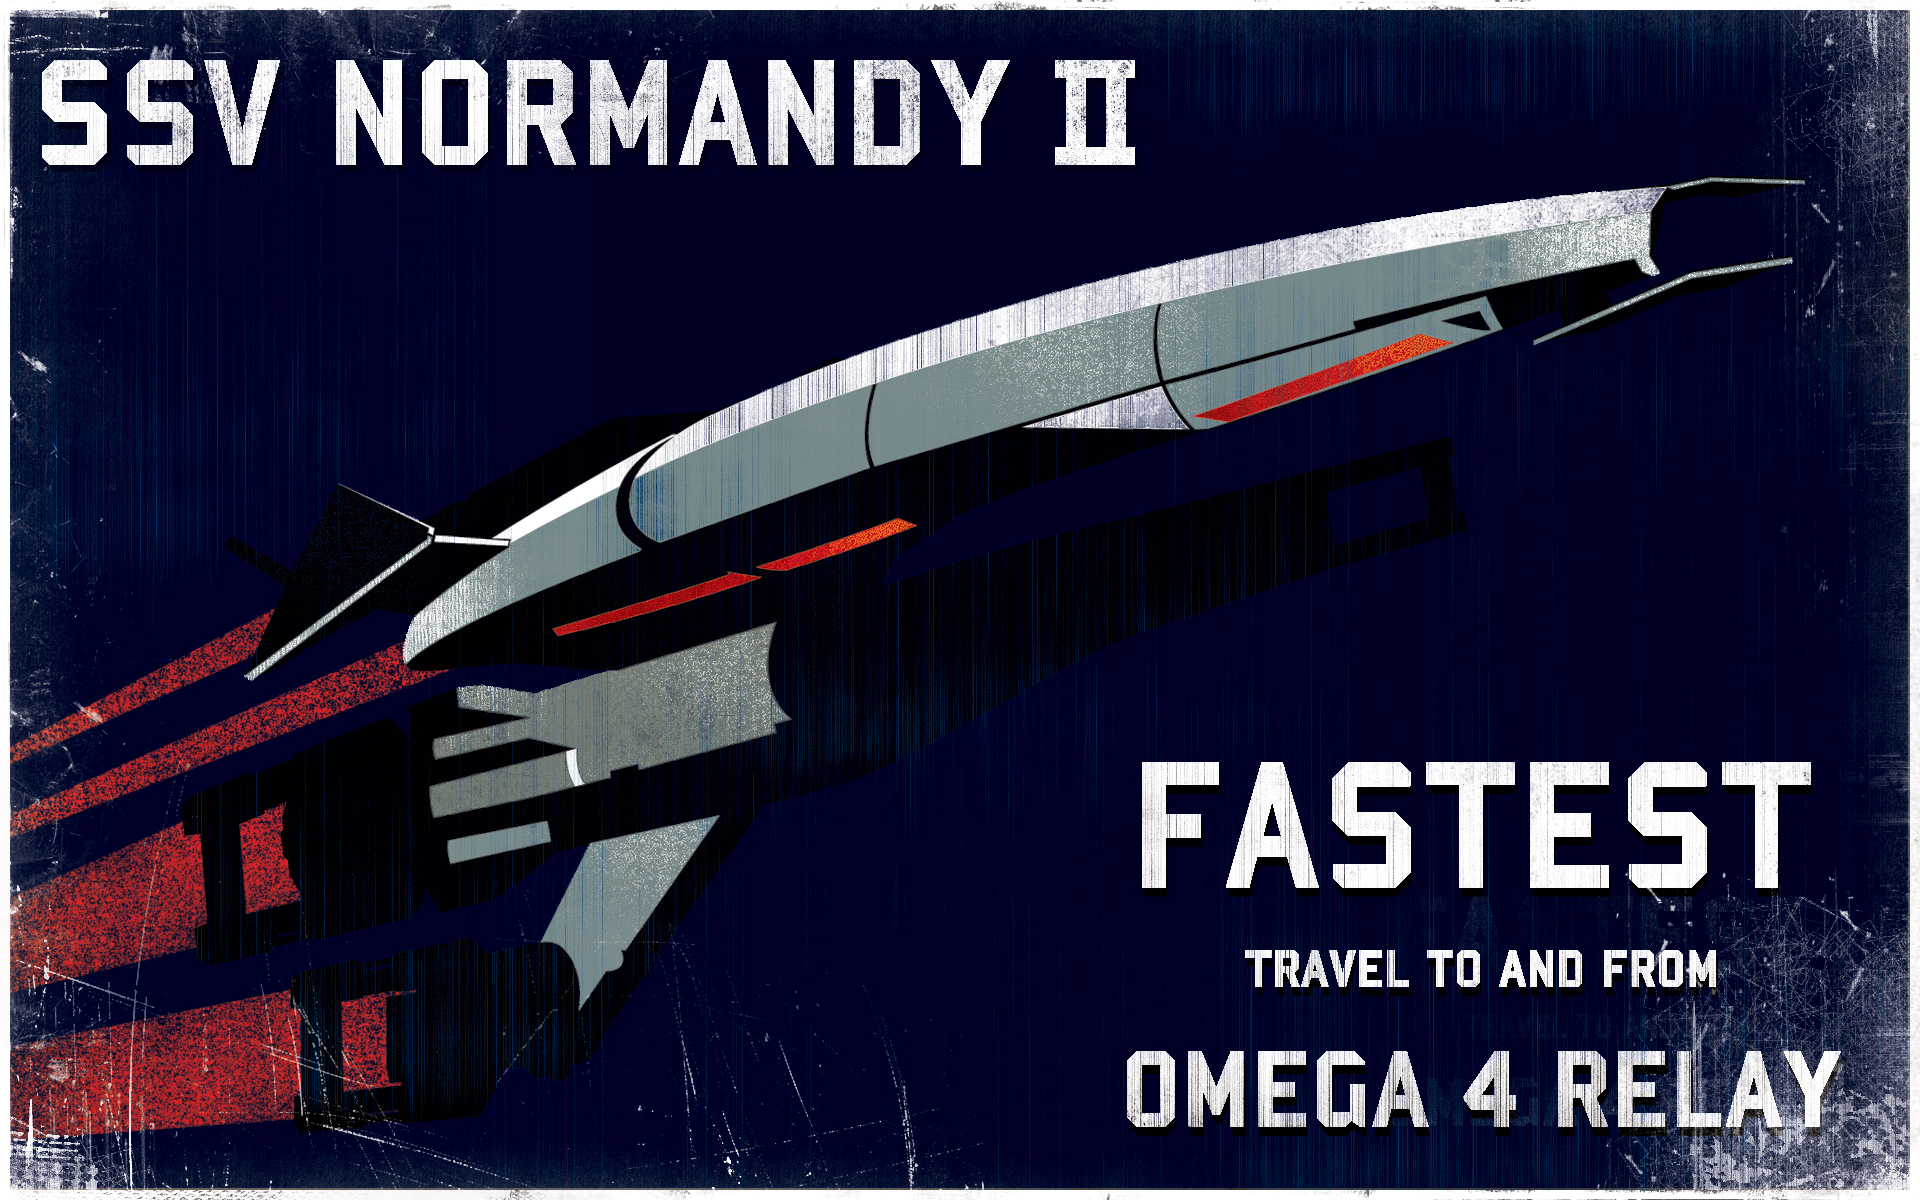 Vintage style HD wallpaper featuring SSV Normandy SR-2 from the Mass Effect series, captioned 'FASTEST - Travel To and From Omega 4 Relay' on a dark starry background for desktop.